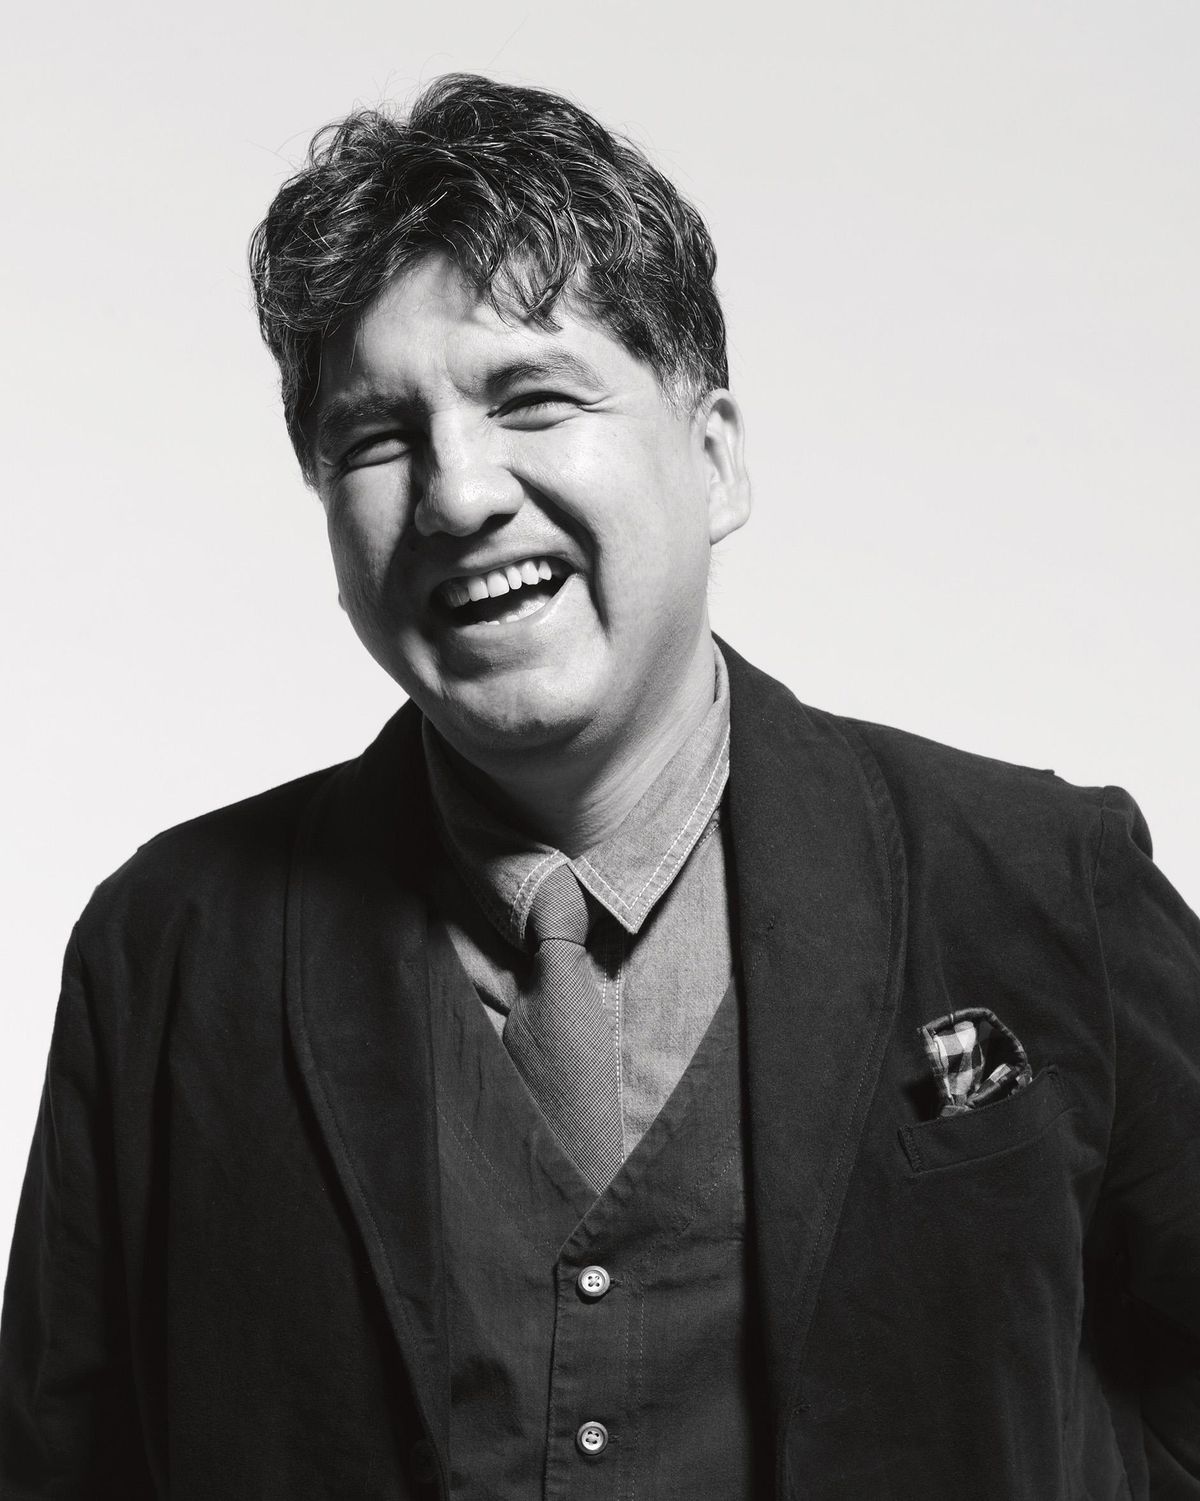 Sherman Alexie will moderate Friday’s screening of “Smoke Signals,” based on his story from the book “The Lone Ranger and Tonto Fistfight in Heaven.” (Courtesy of Lee Towndrow)